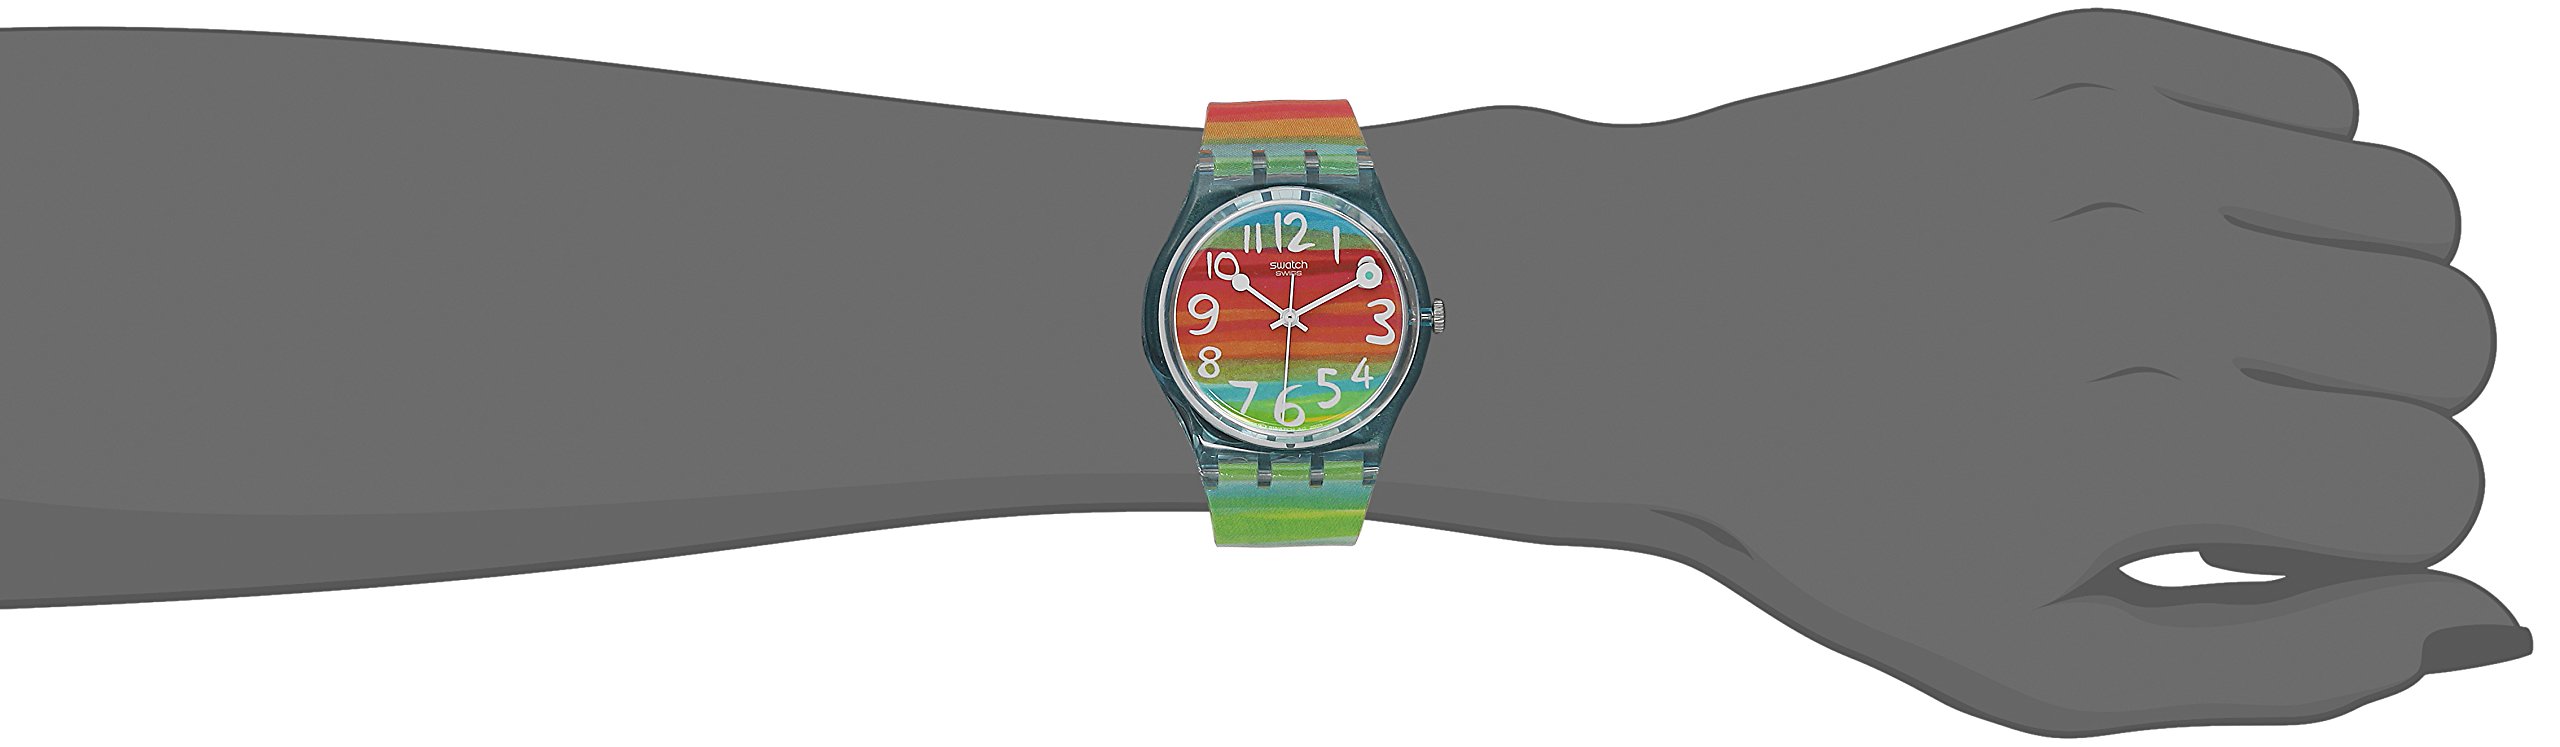 Swatch COLOR THE SKY Unisex Watch (Model: GS124)